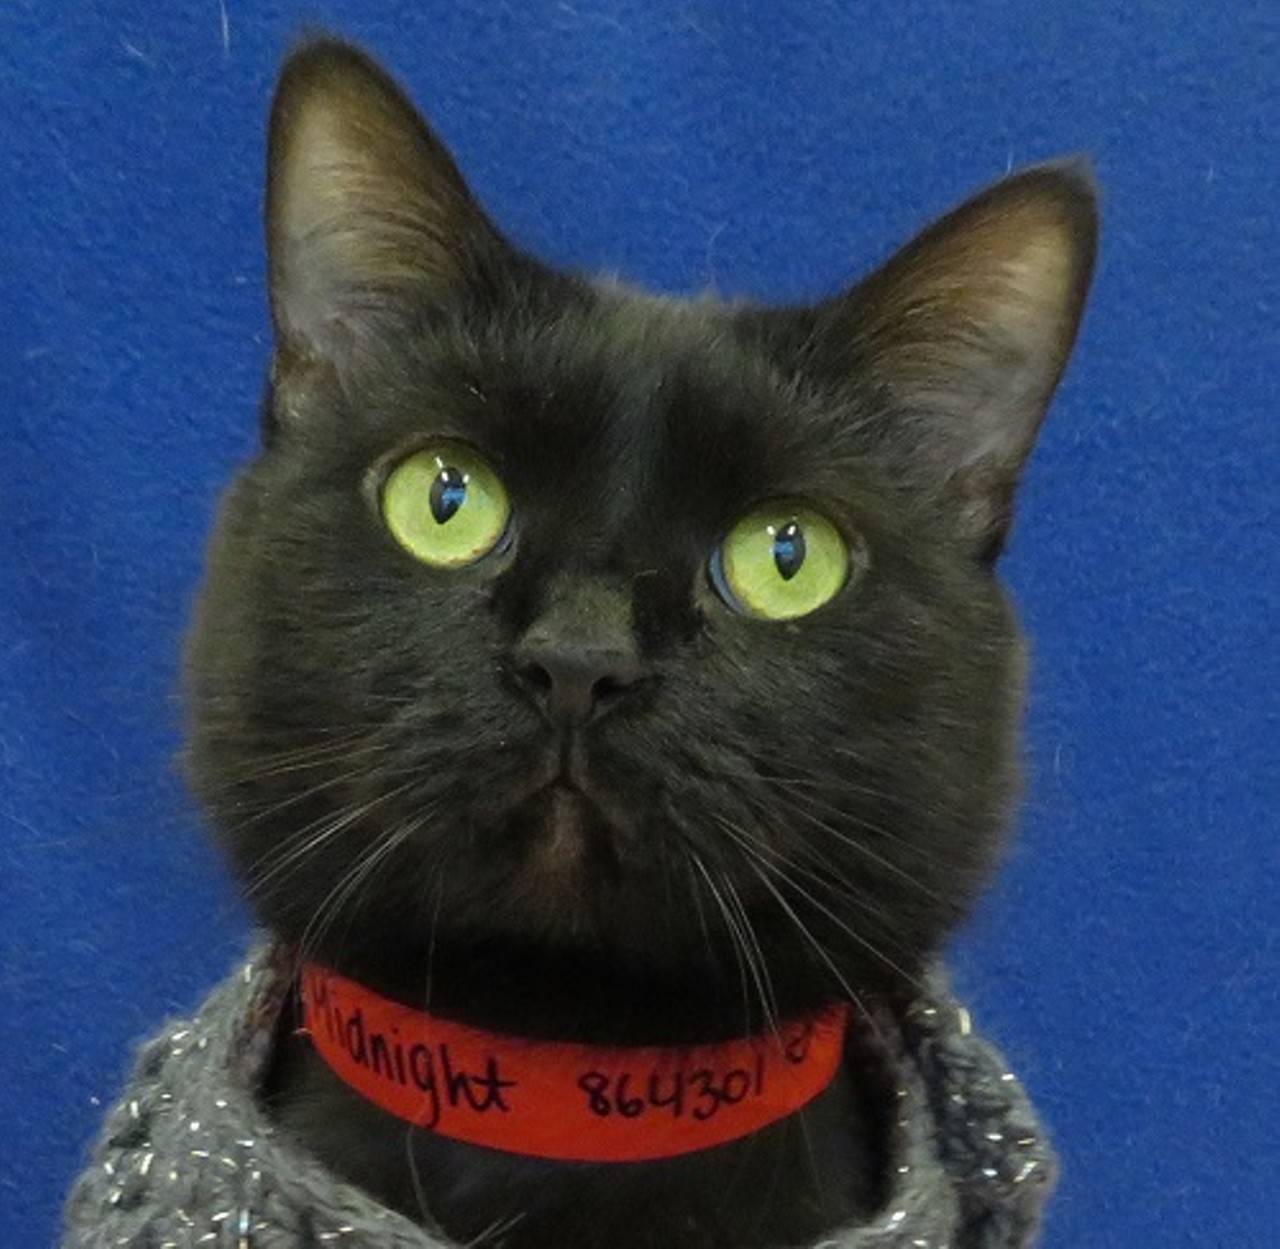 NAME: Midnight
GENDER: Female
BREED: Domestic Short Hair
AGE: 8 years
WEIGHT: 12 pounds
SPECIAL CONSIDERATIONS: None
REASON I CAME TO MHS: Owner surrender
LOCATION: Petco of Sterling Heights
ID NUMBER: 864301